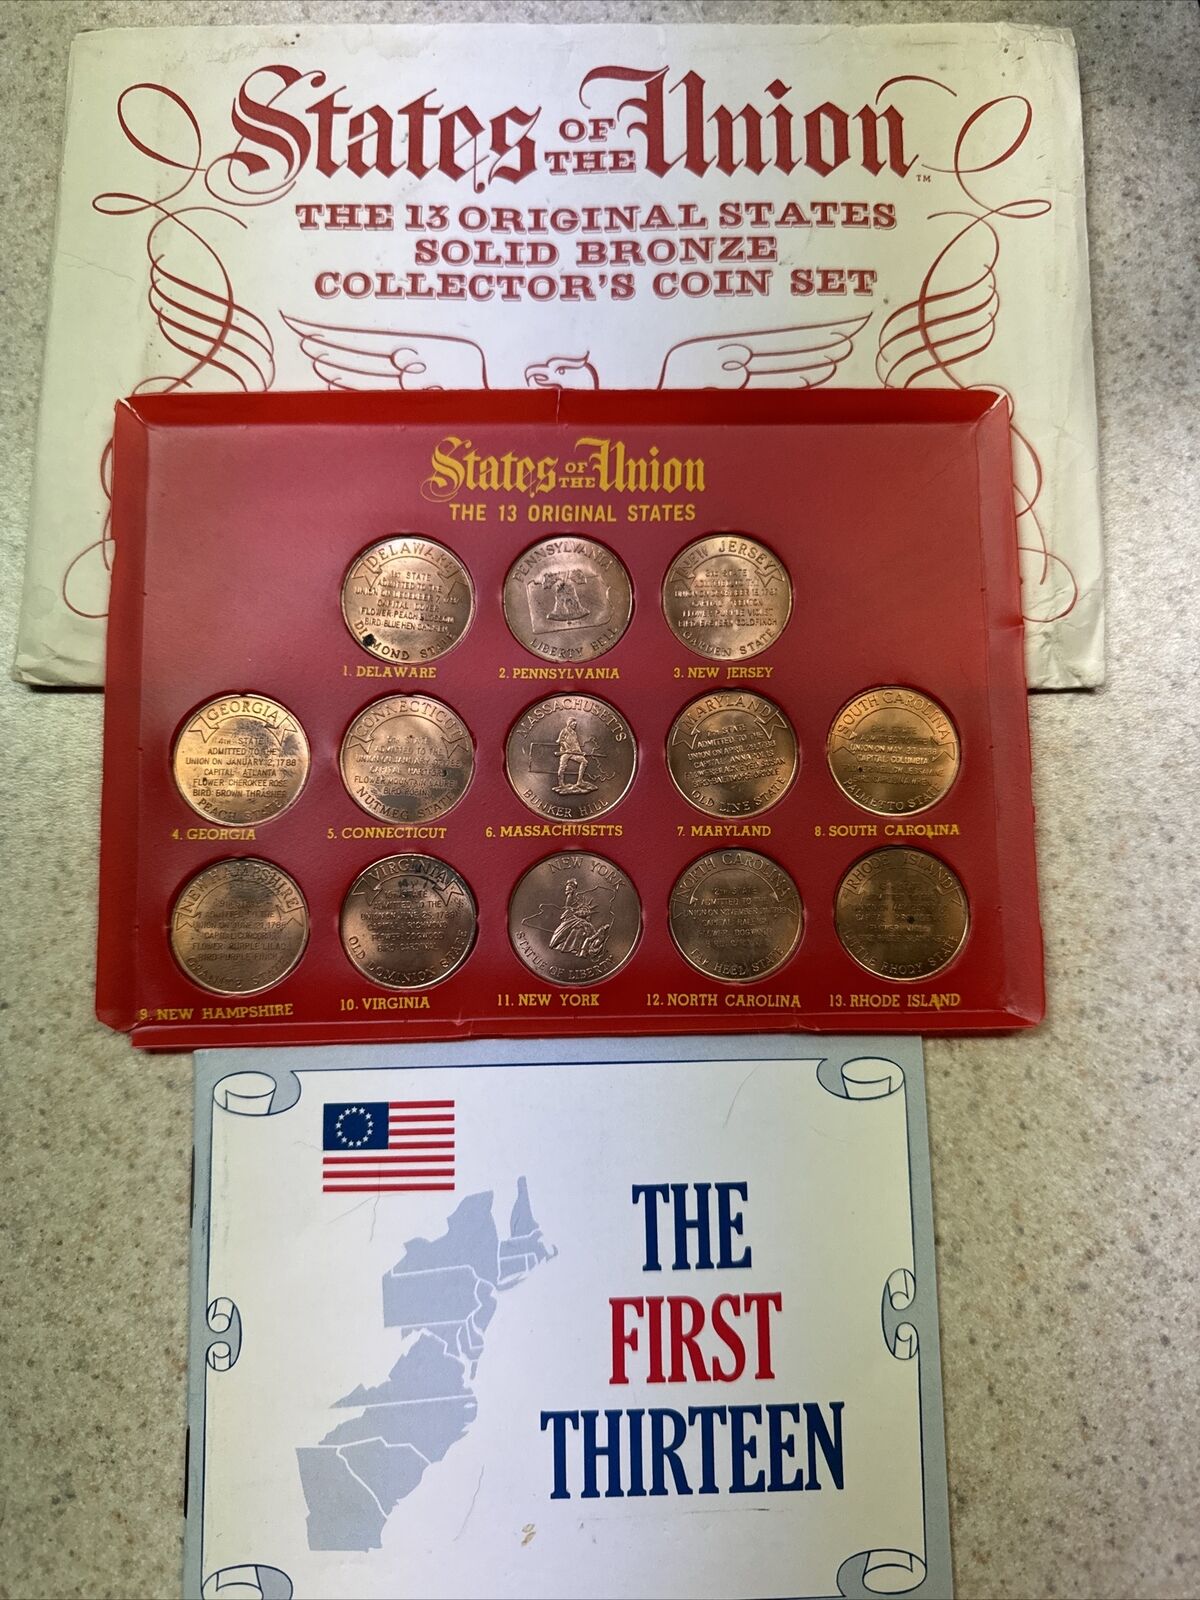 1969 Shell Oil States of the Union 13 Original States Solid Bronze Coin Set